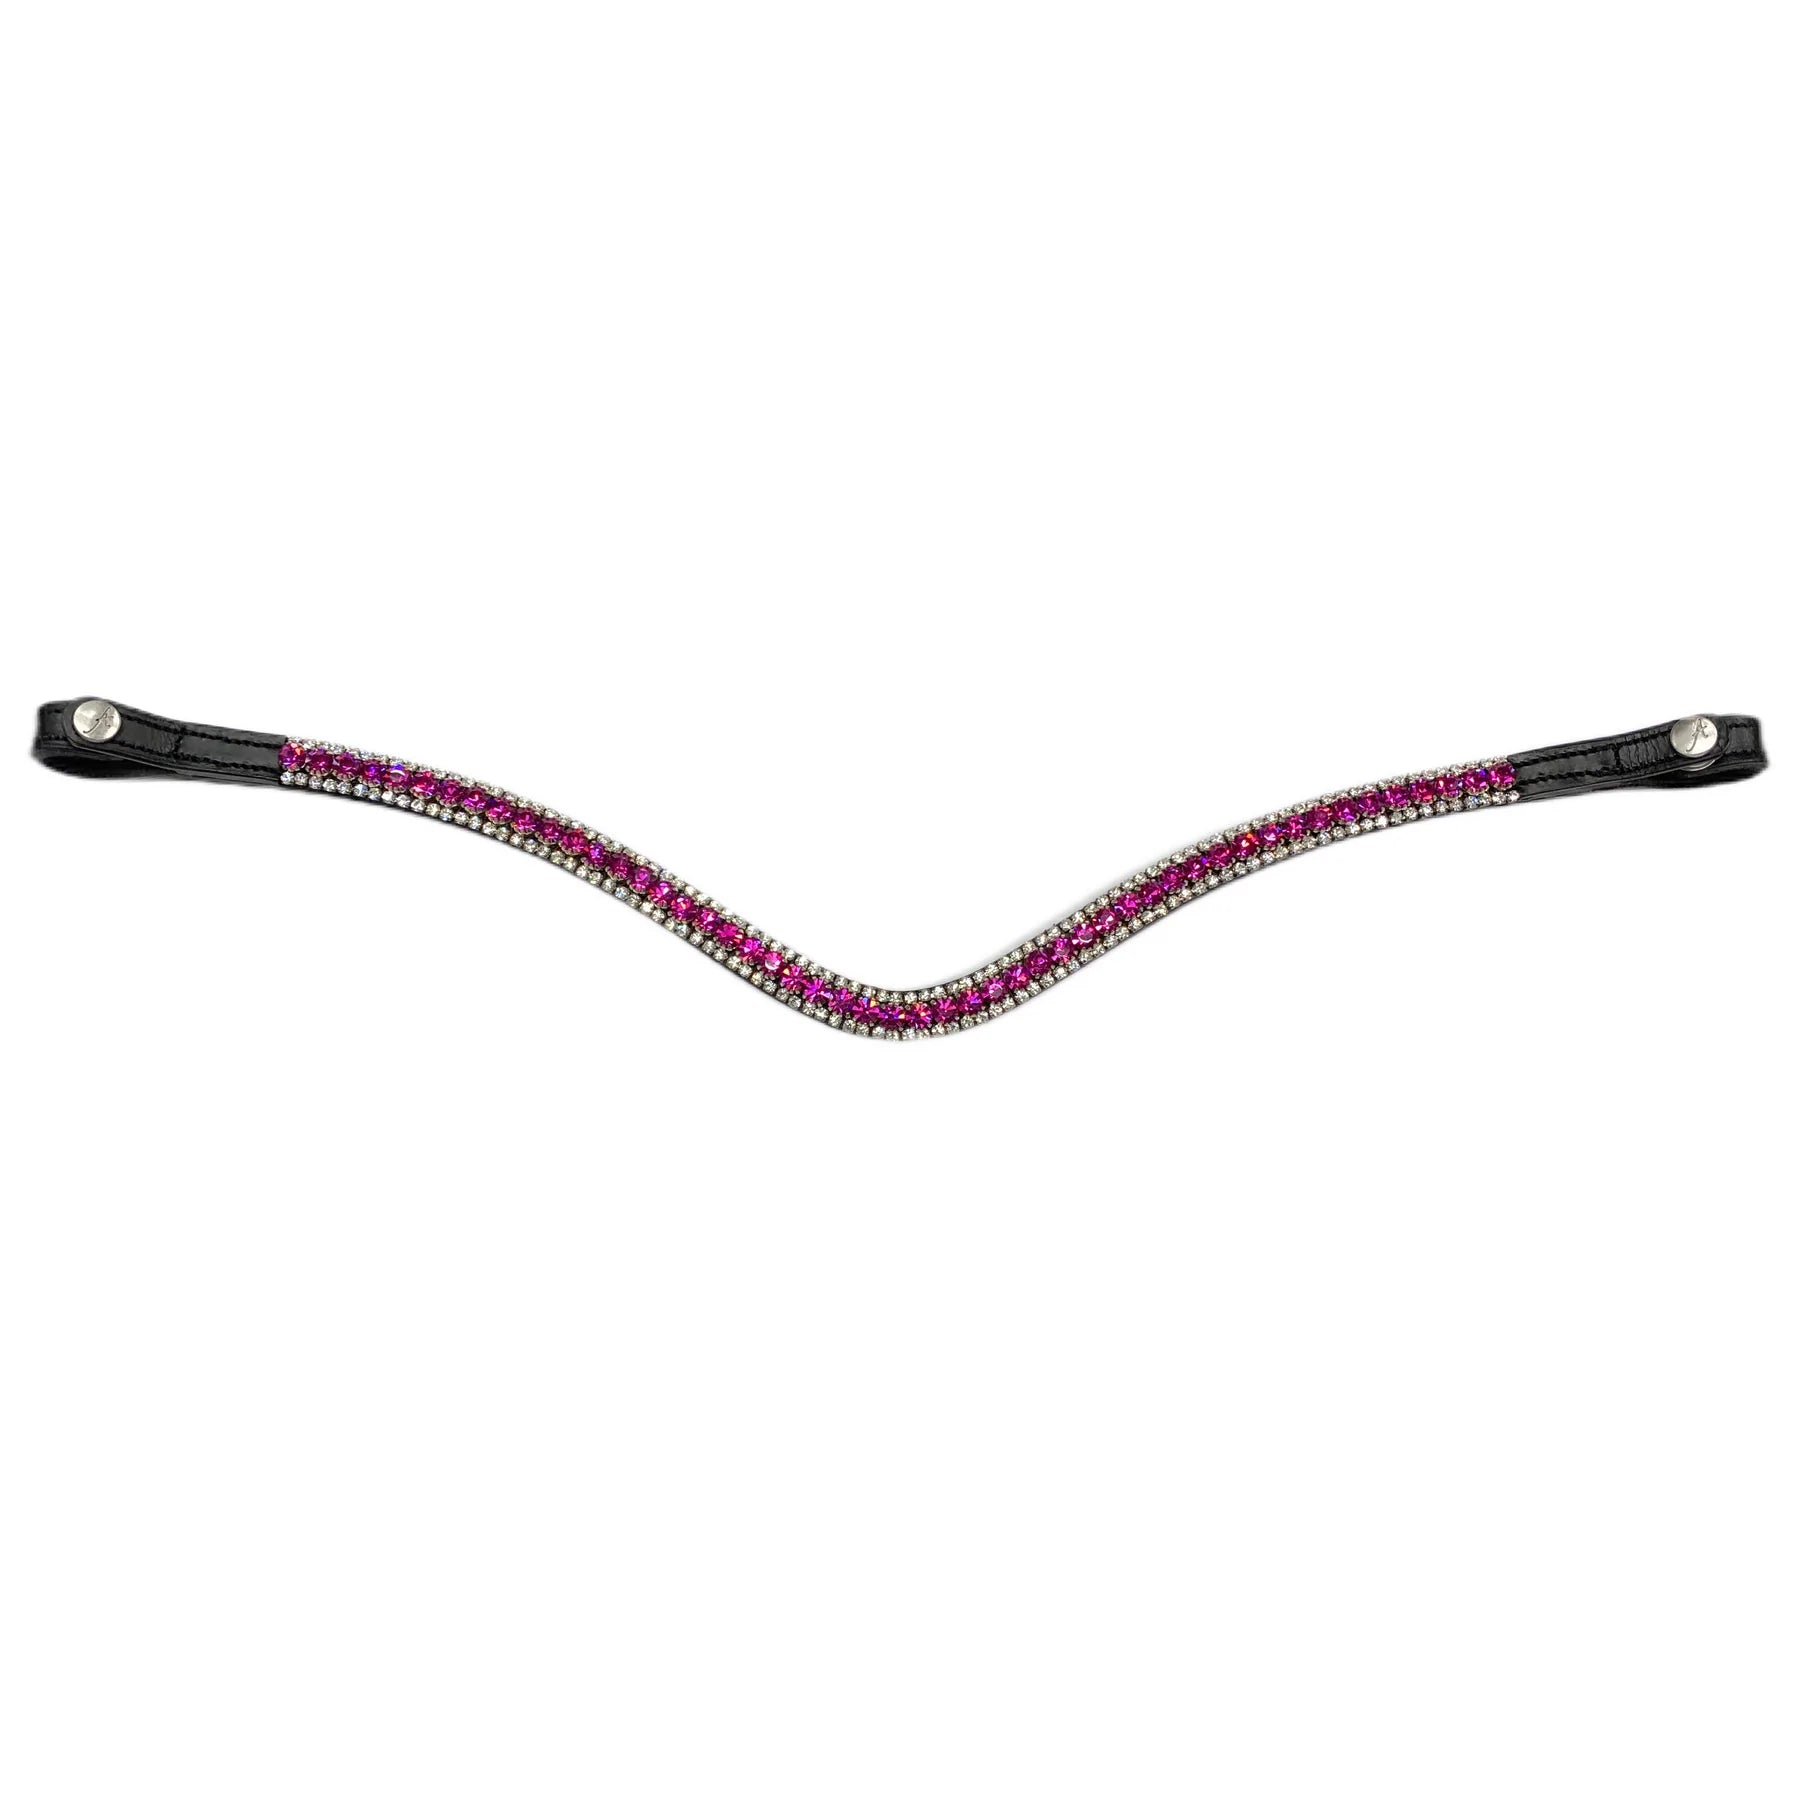 Artemis Equine Lux Fuchsia Snap-On Browband, Black Leather